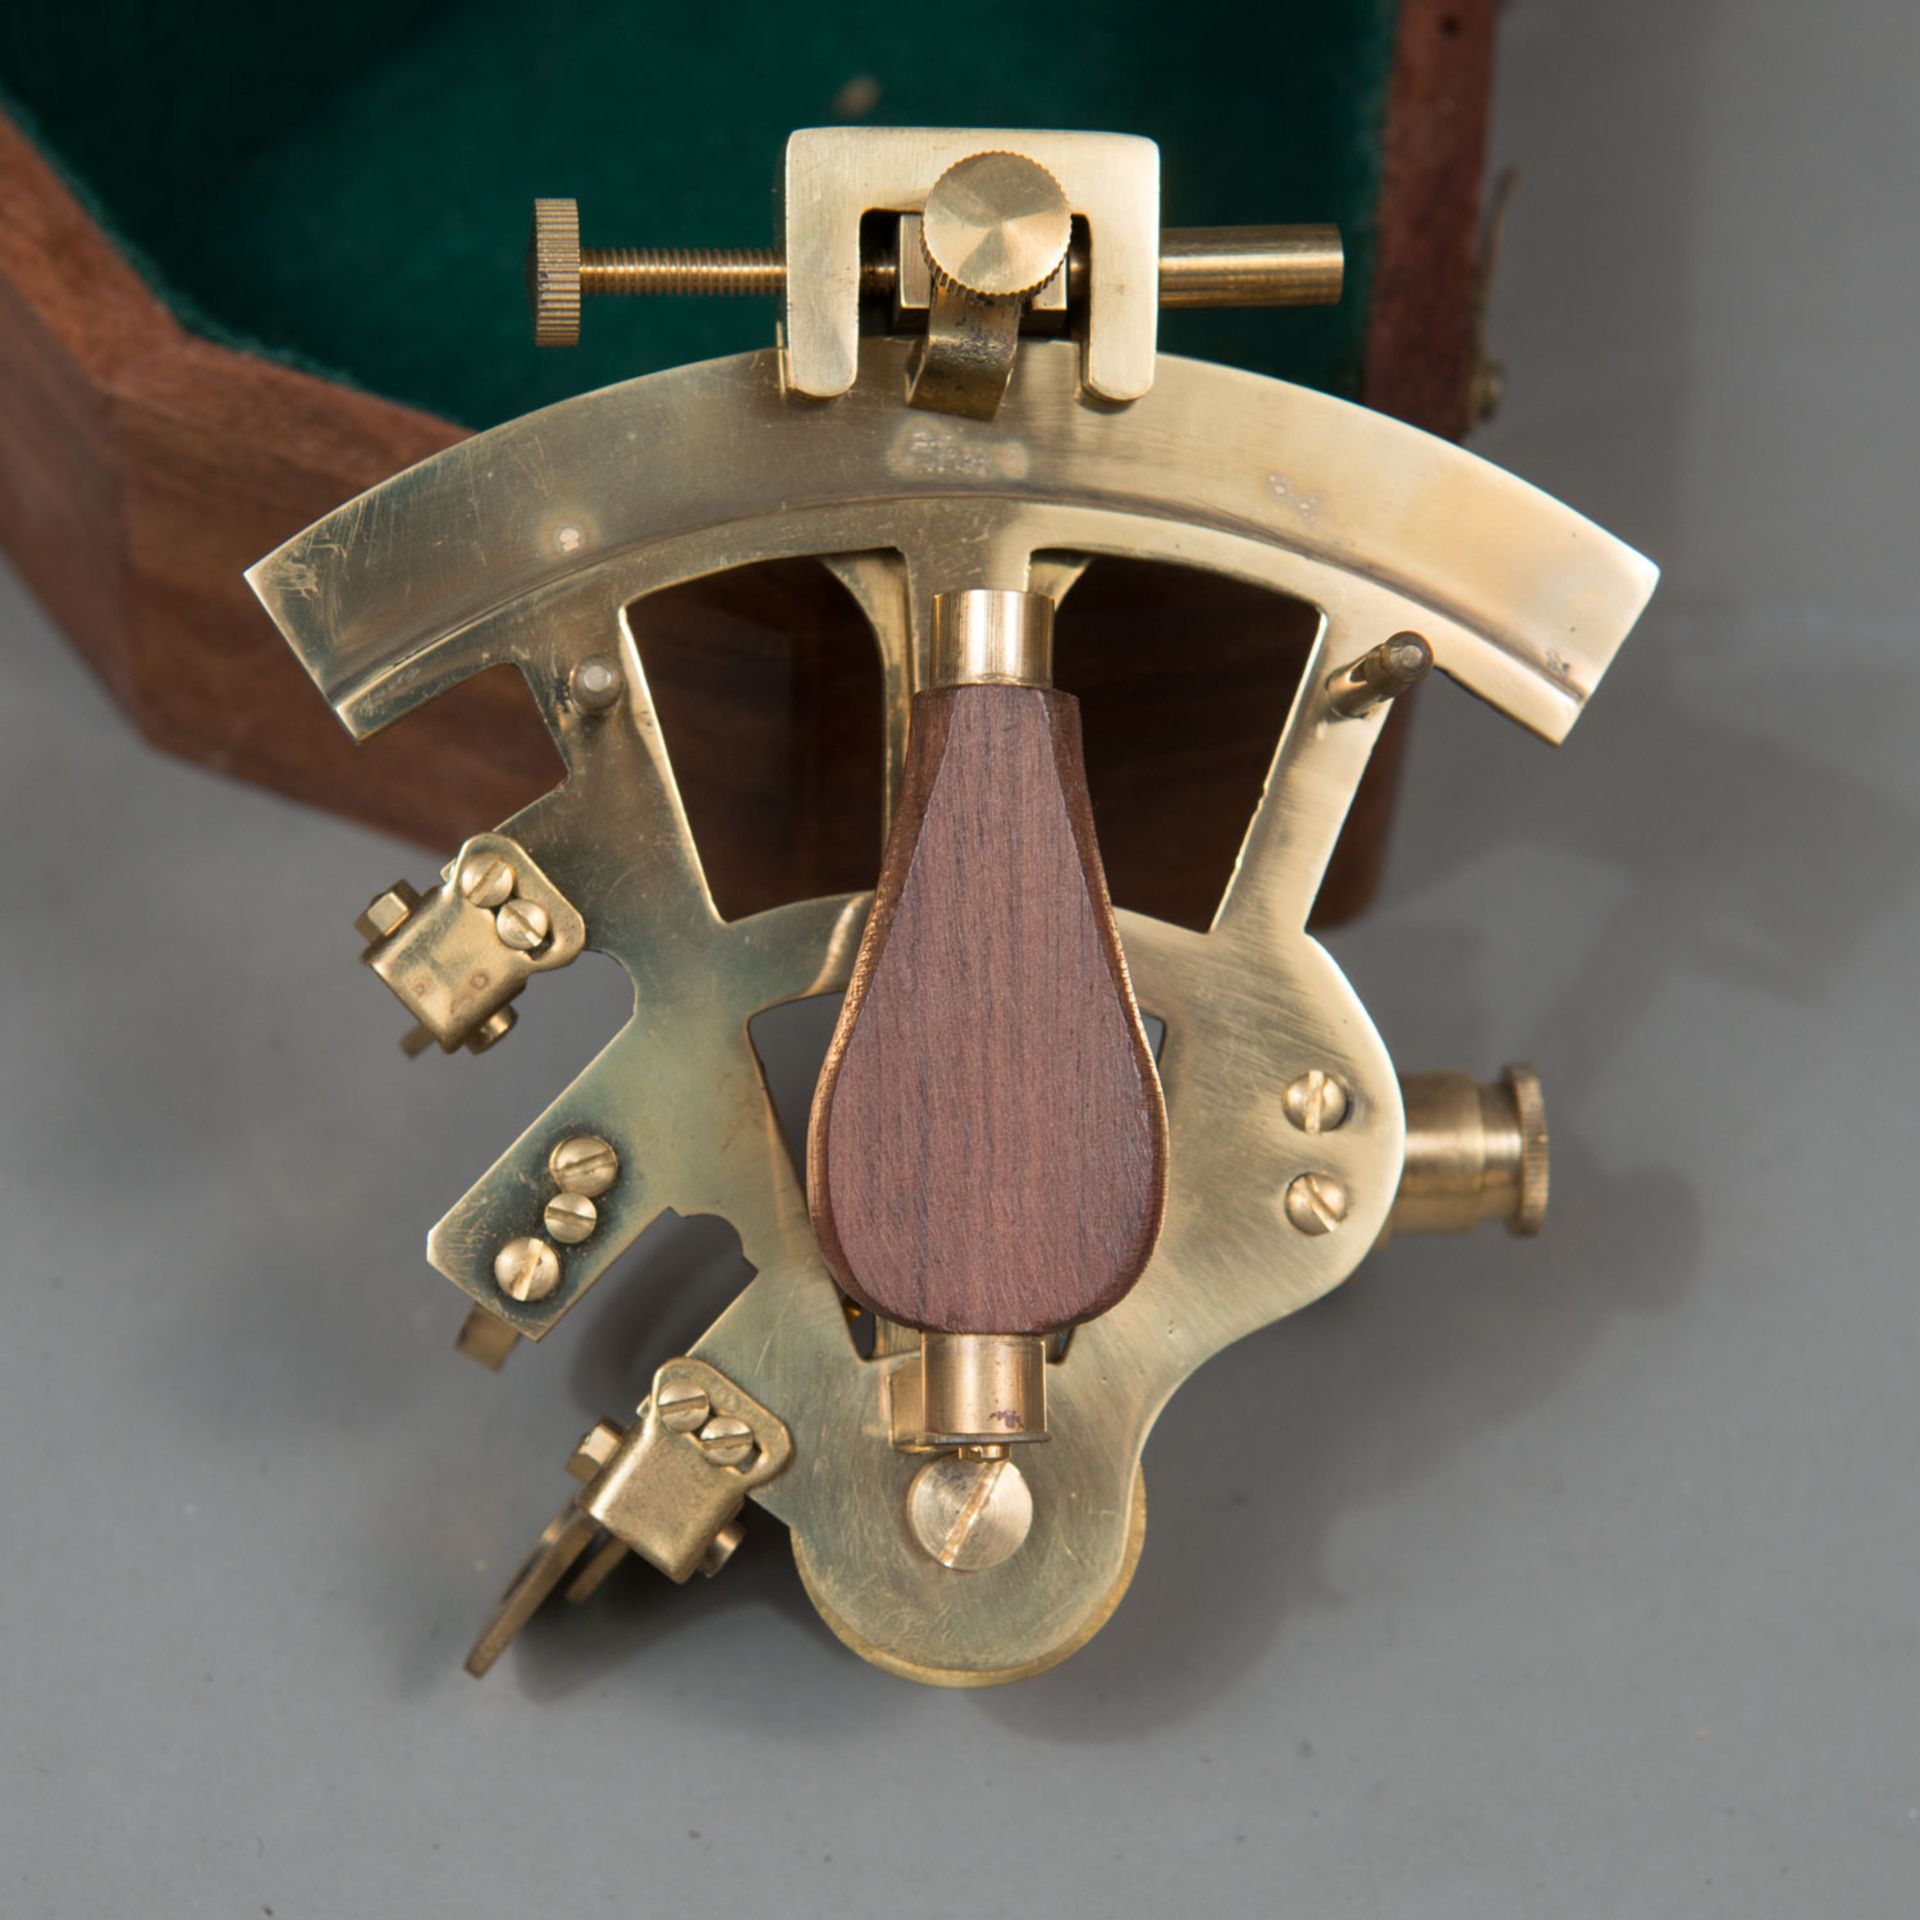 Kelvin and Hughes Sextant - Image 2 of 3